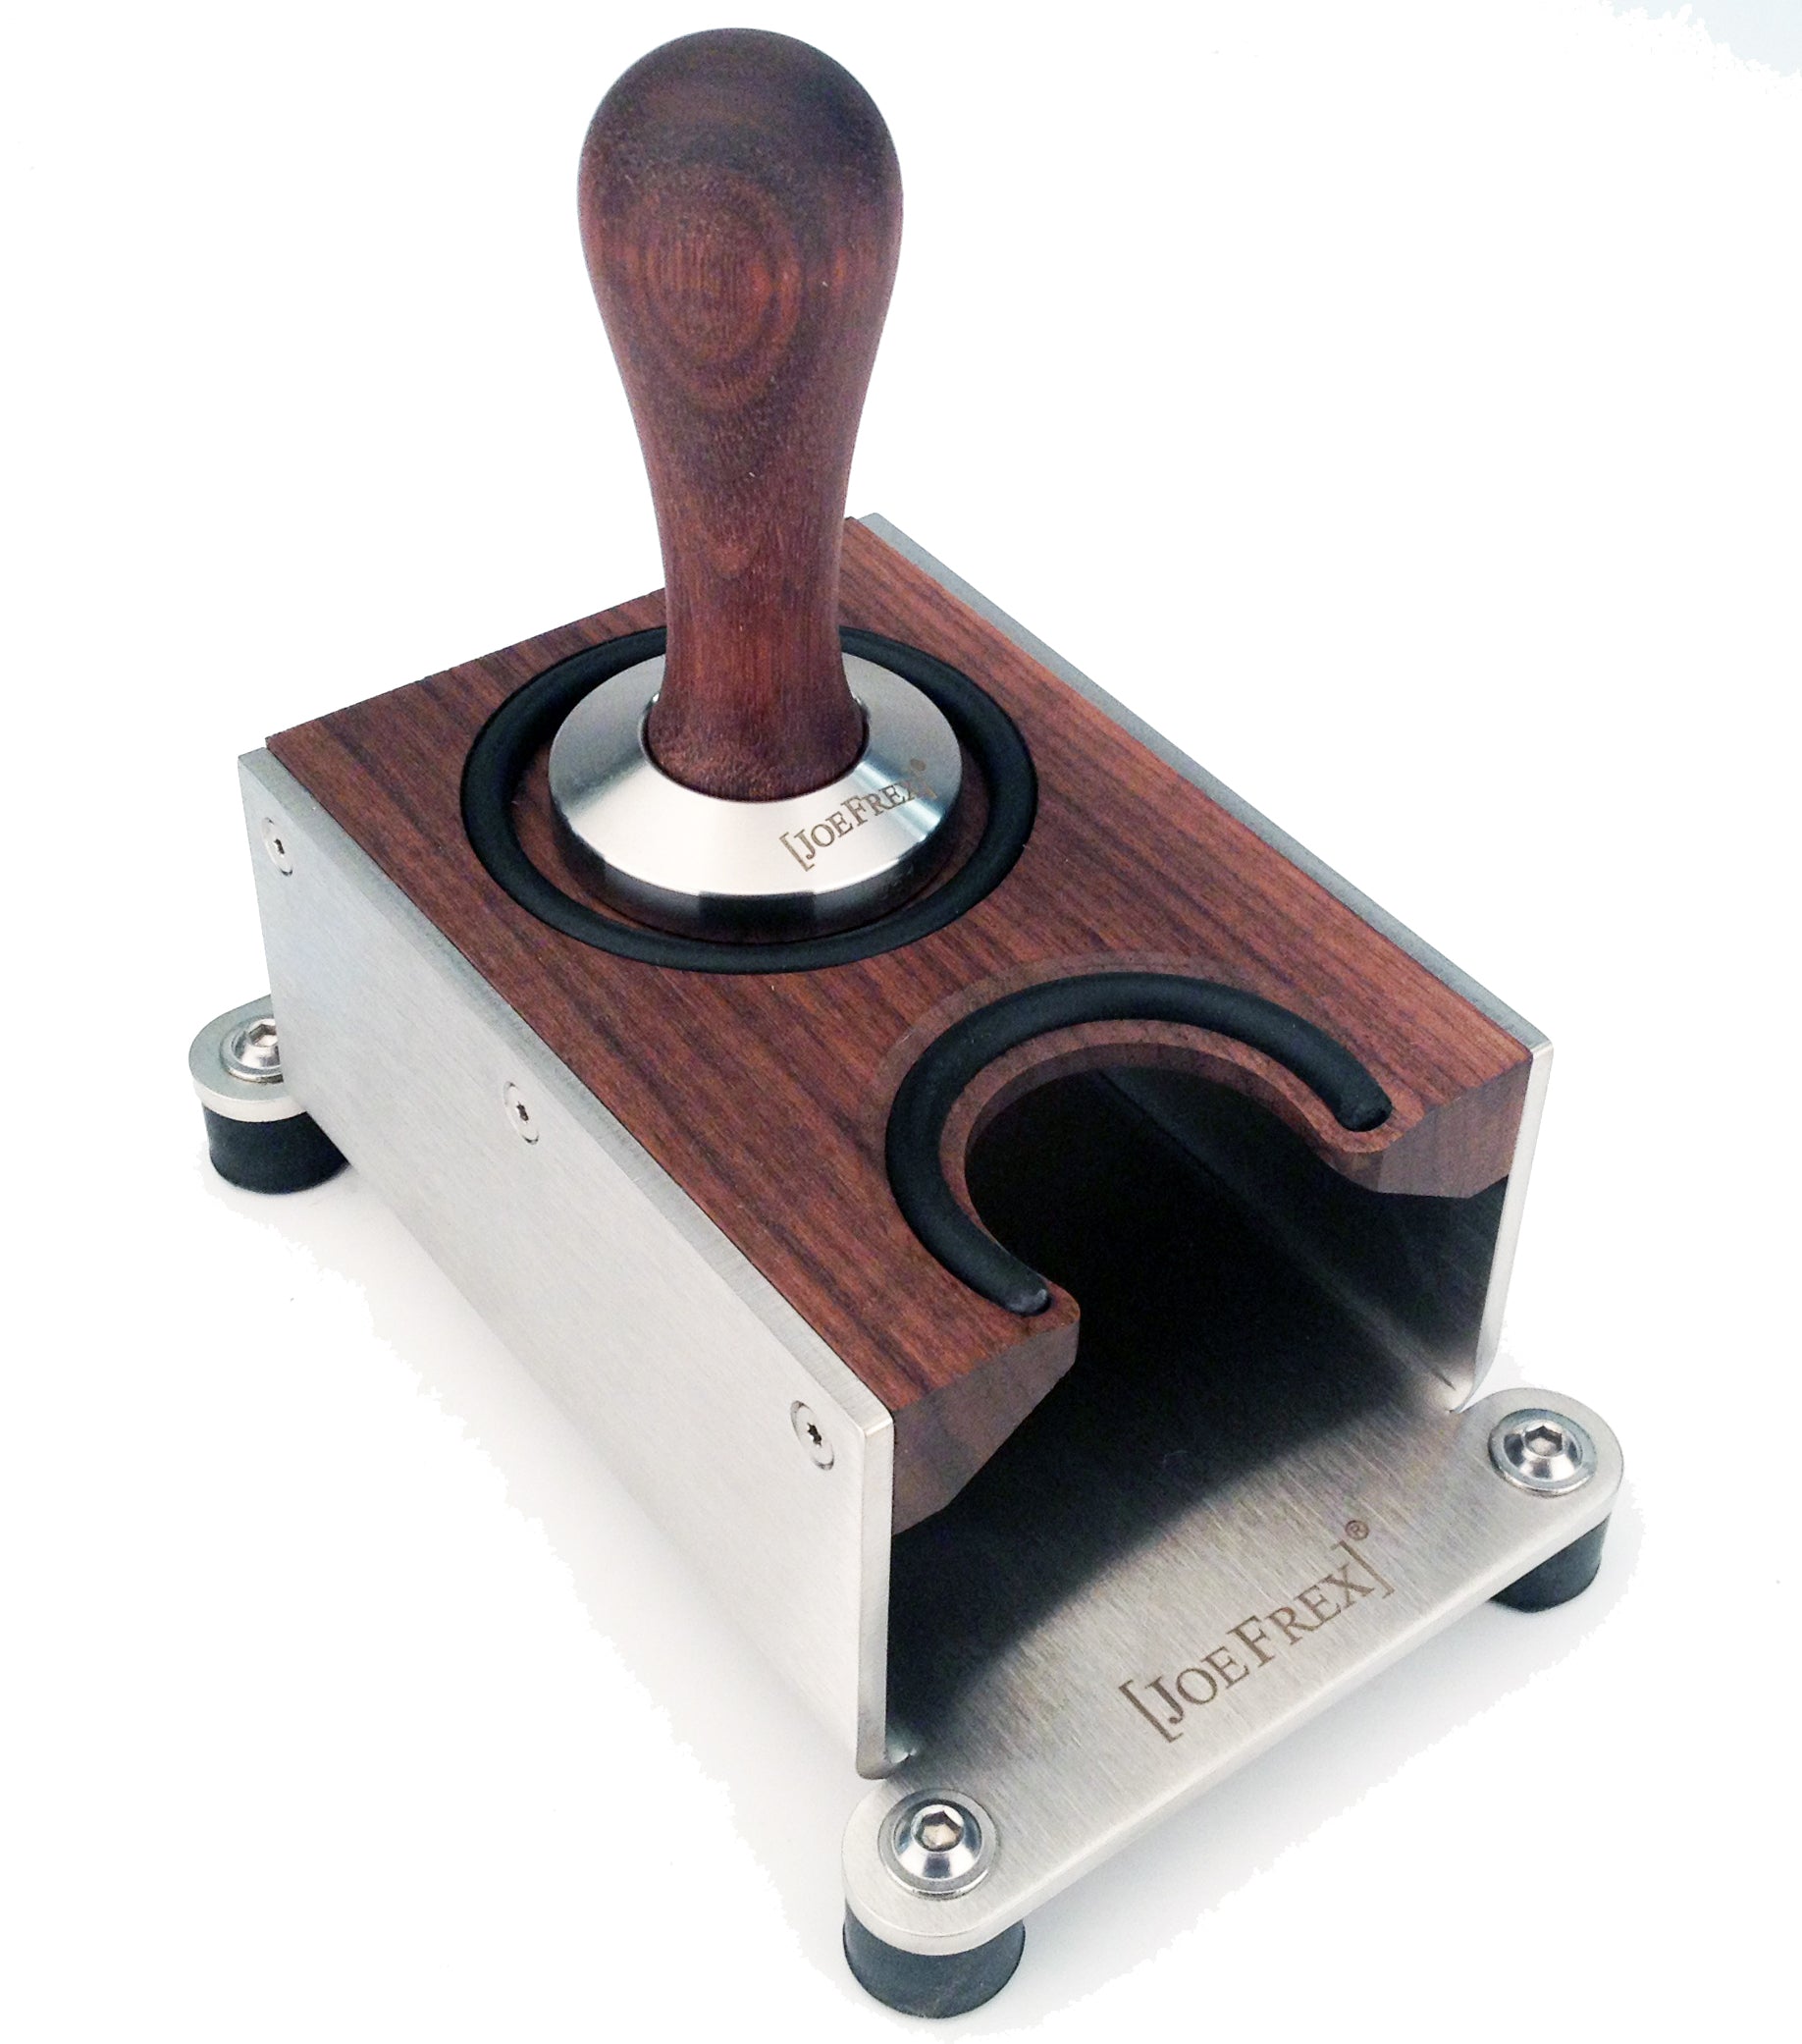 Tamping station walnut wood and stainless steel for pressing your coffee 